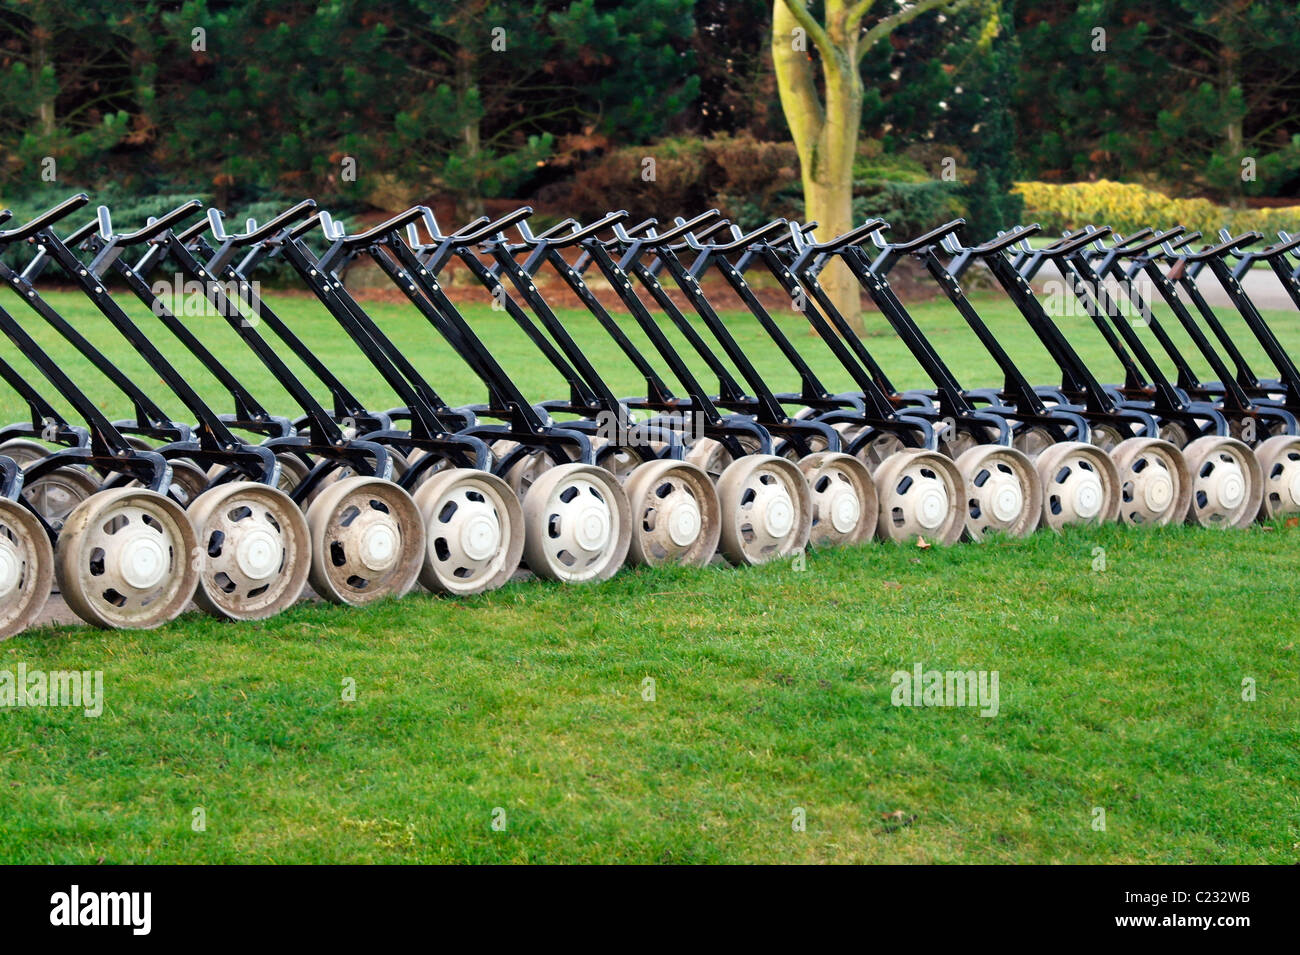 Photo of golf trolleys in a line Stock Photo